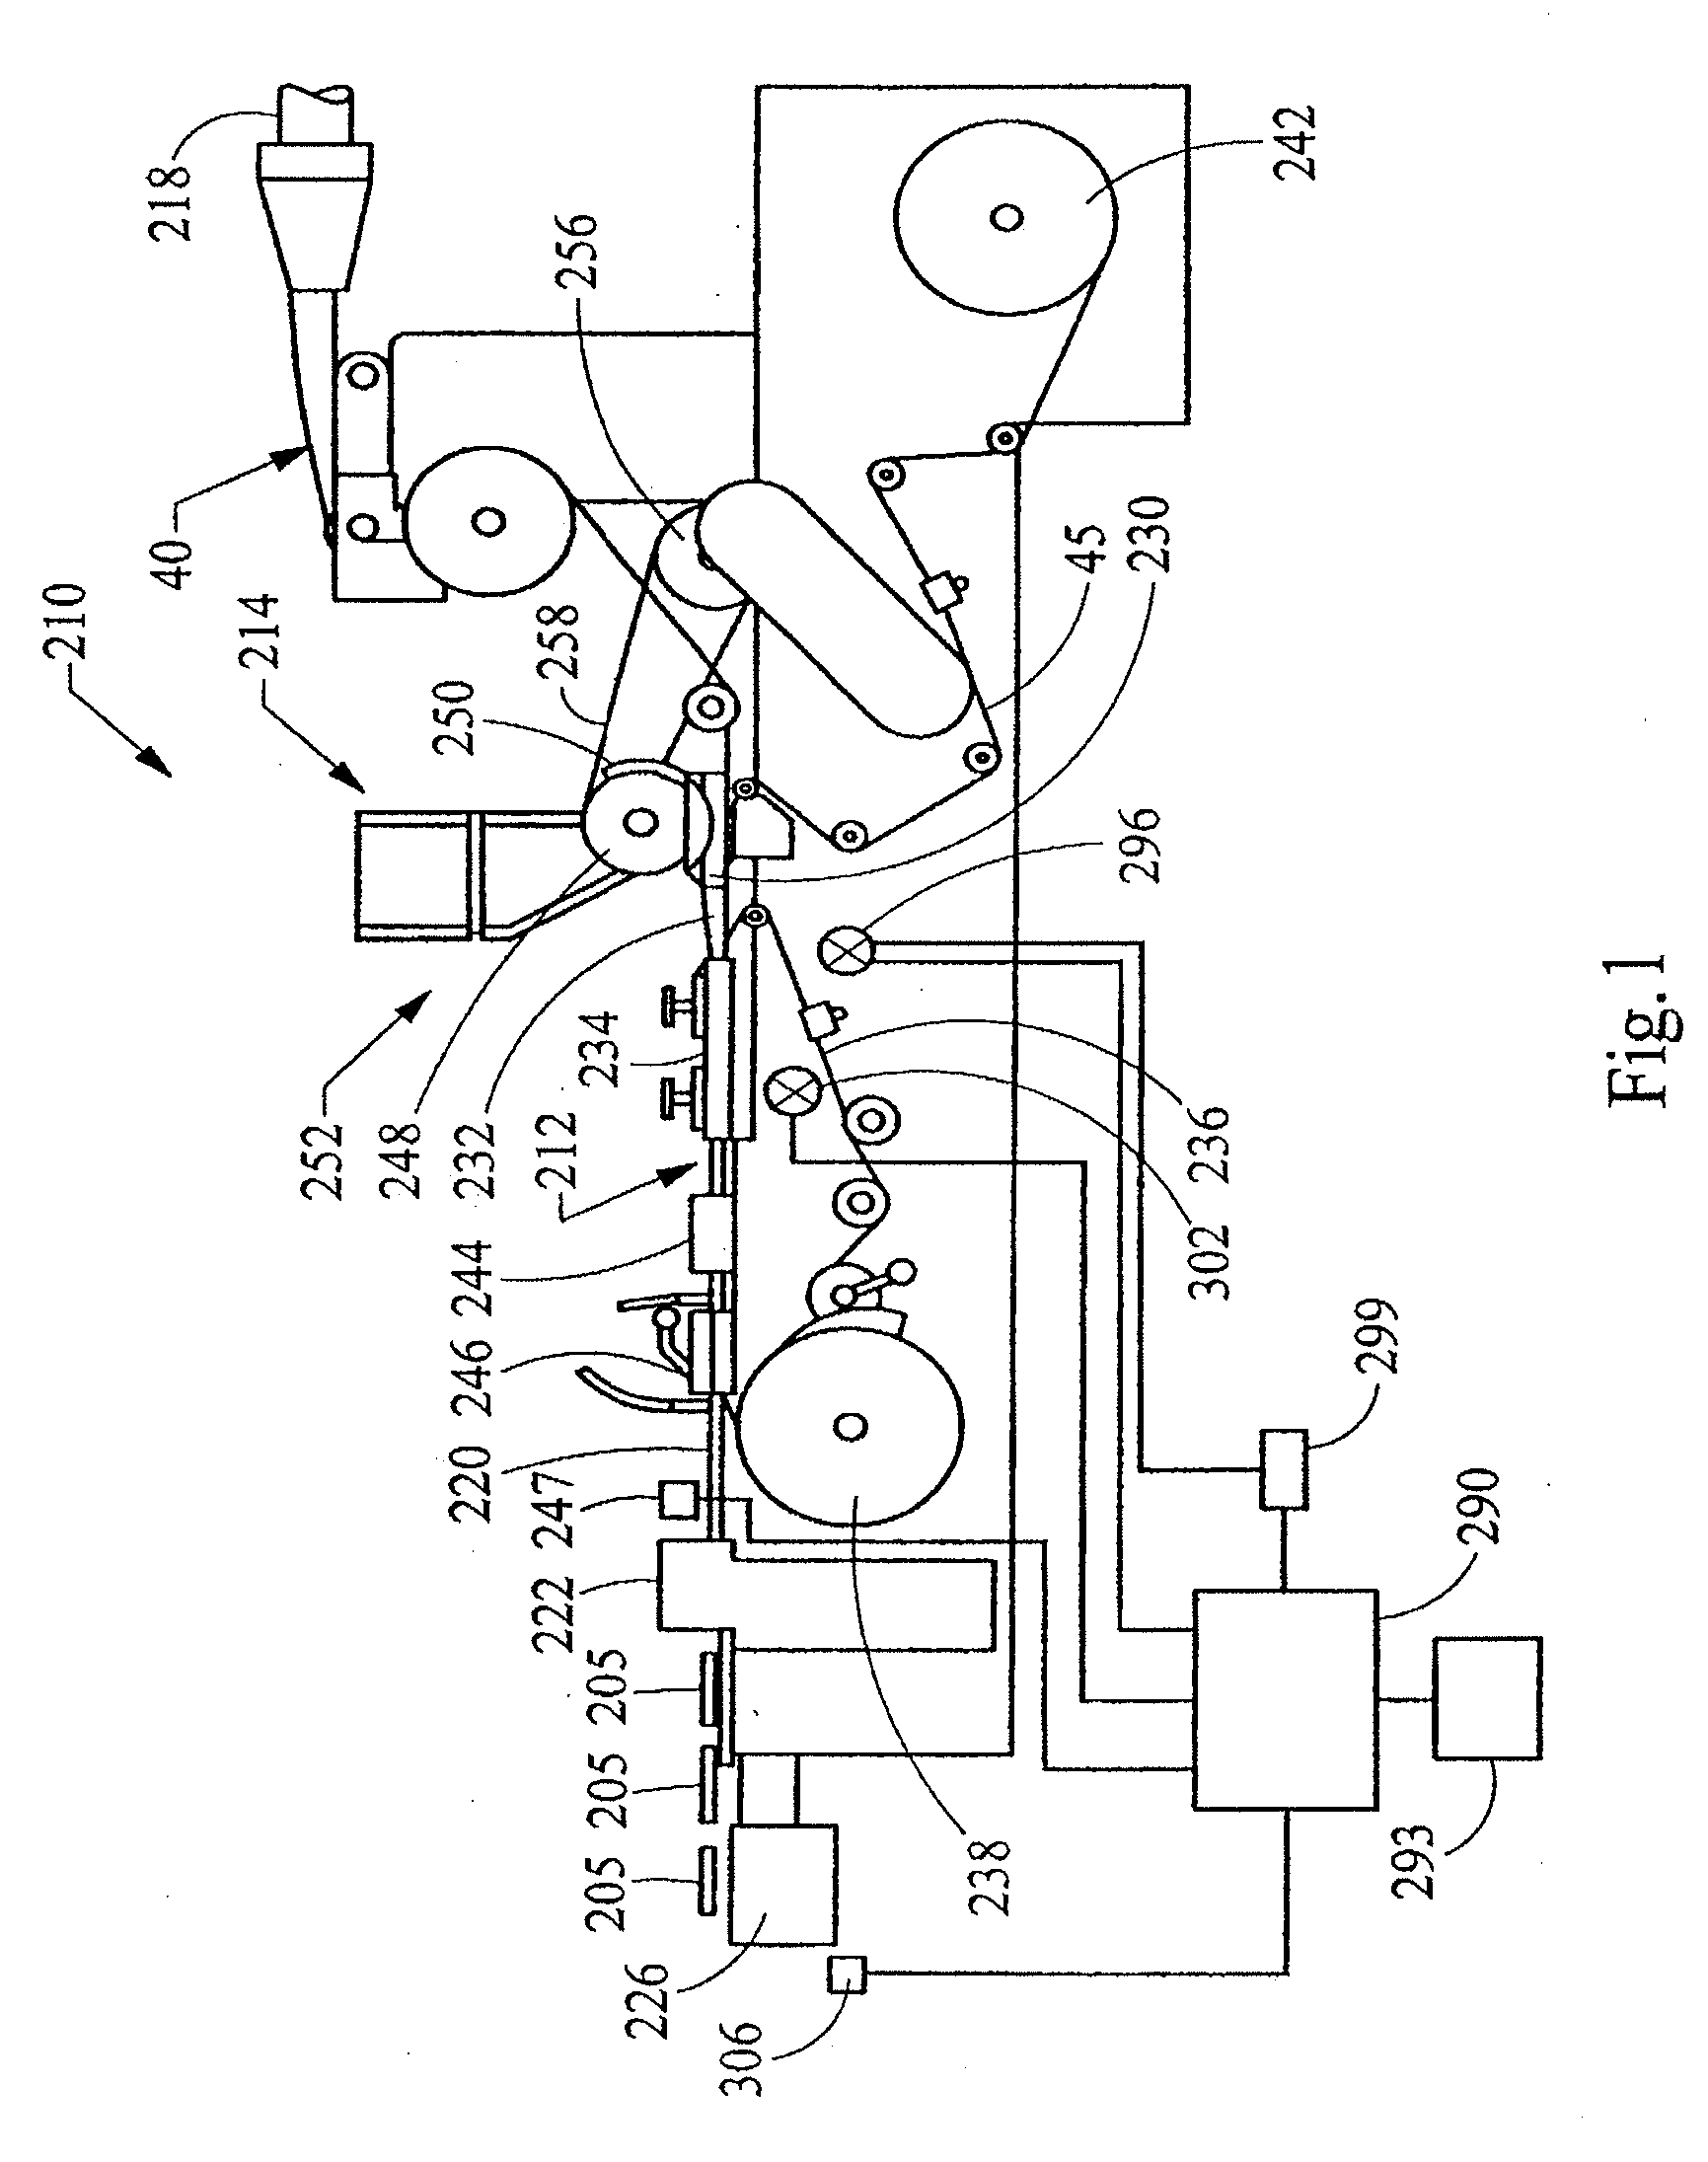 Apparatus for enhancing a filter component of a smoking article, and associated method